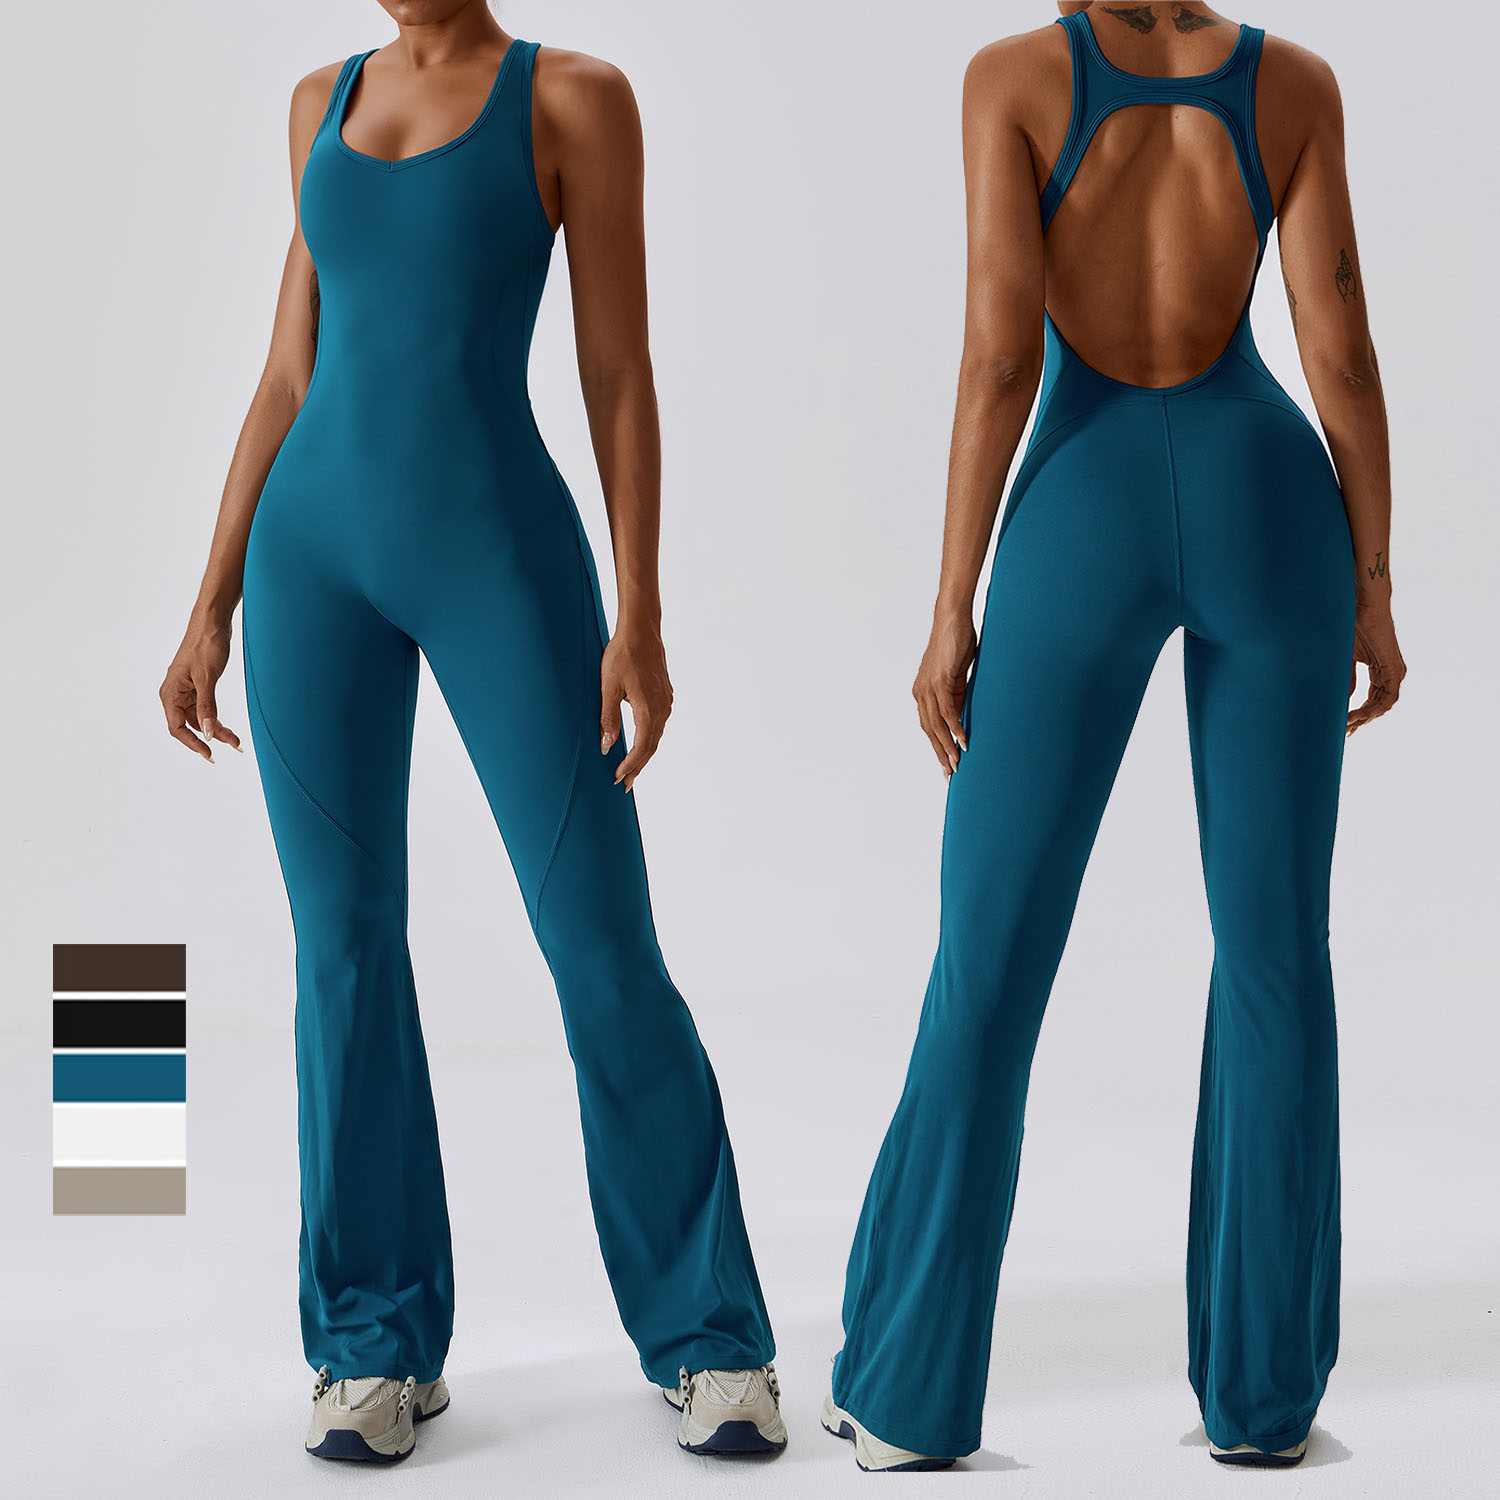 Yoga Jumpsuit Hollow Out Back Un Darn Fitness Workout Romper Flared Pants